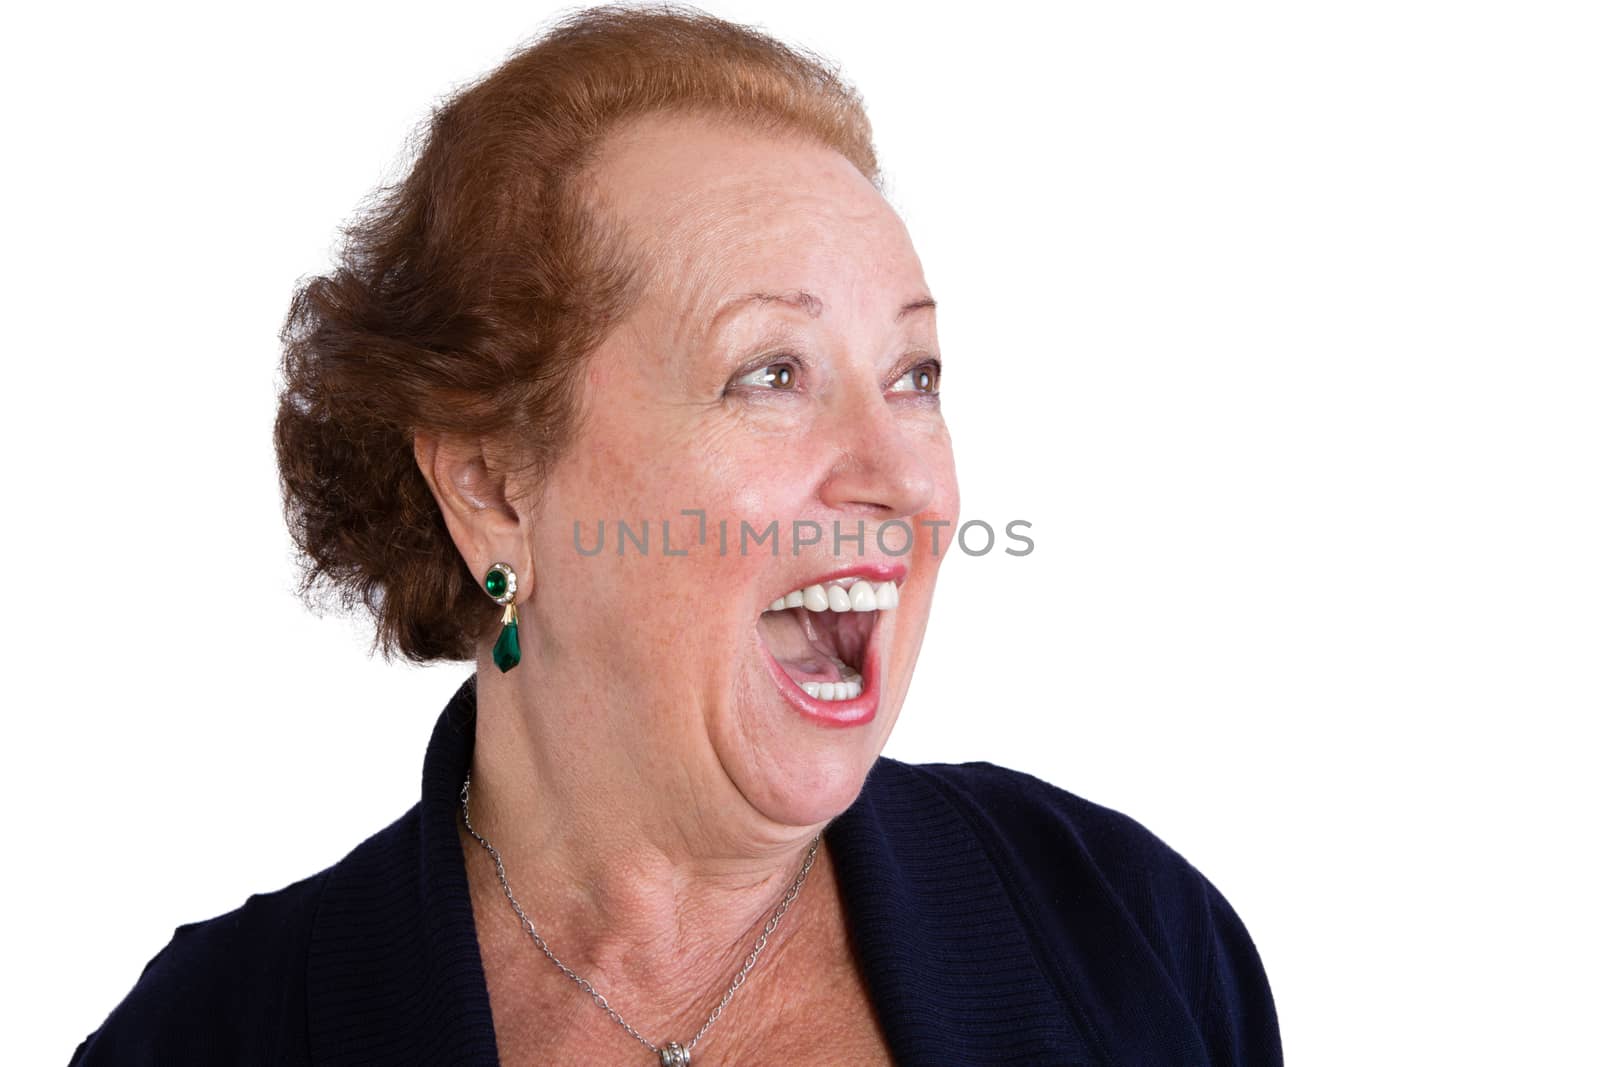 Close up Senior Woman Showing a Surprised Facial Expression with Mouth Open and Looking to the Right of the Frame, Isolated on White Background.